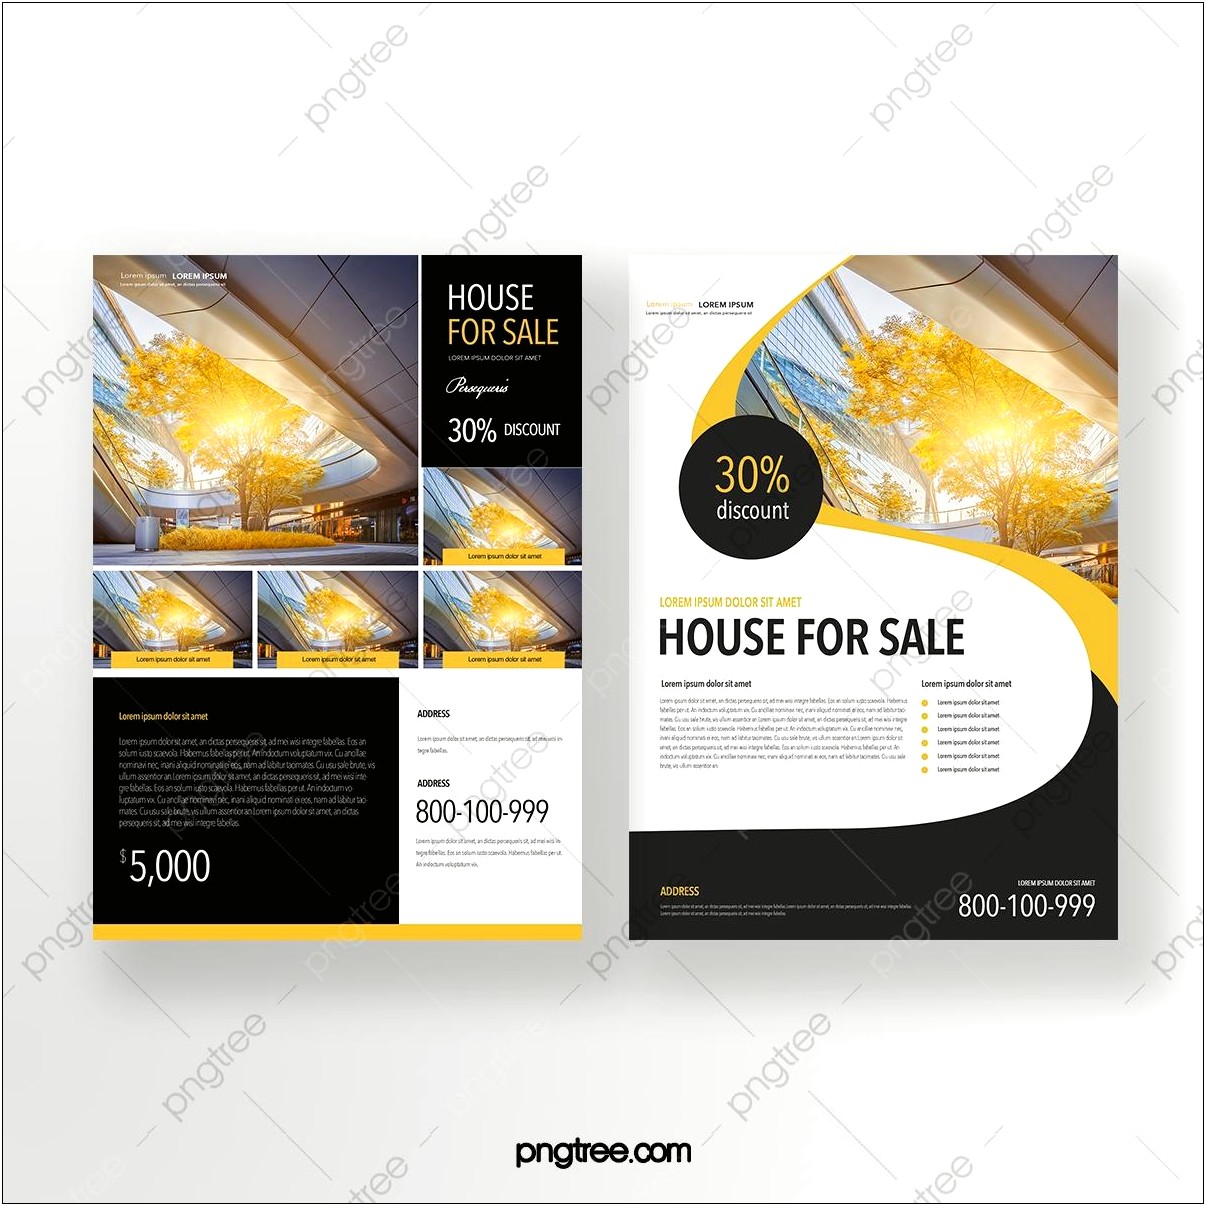 Free House For Sale Brochure Template